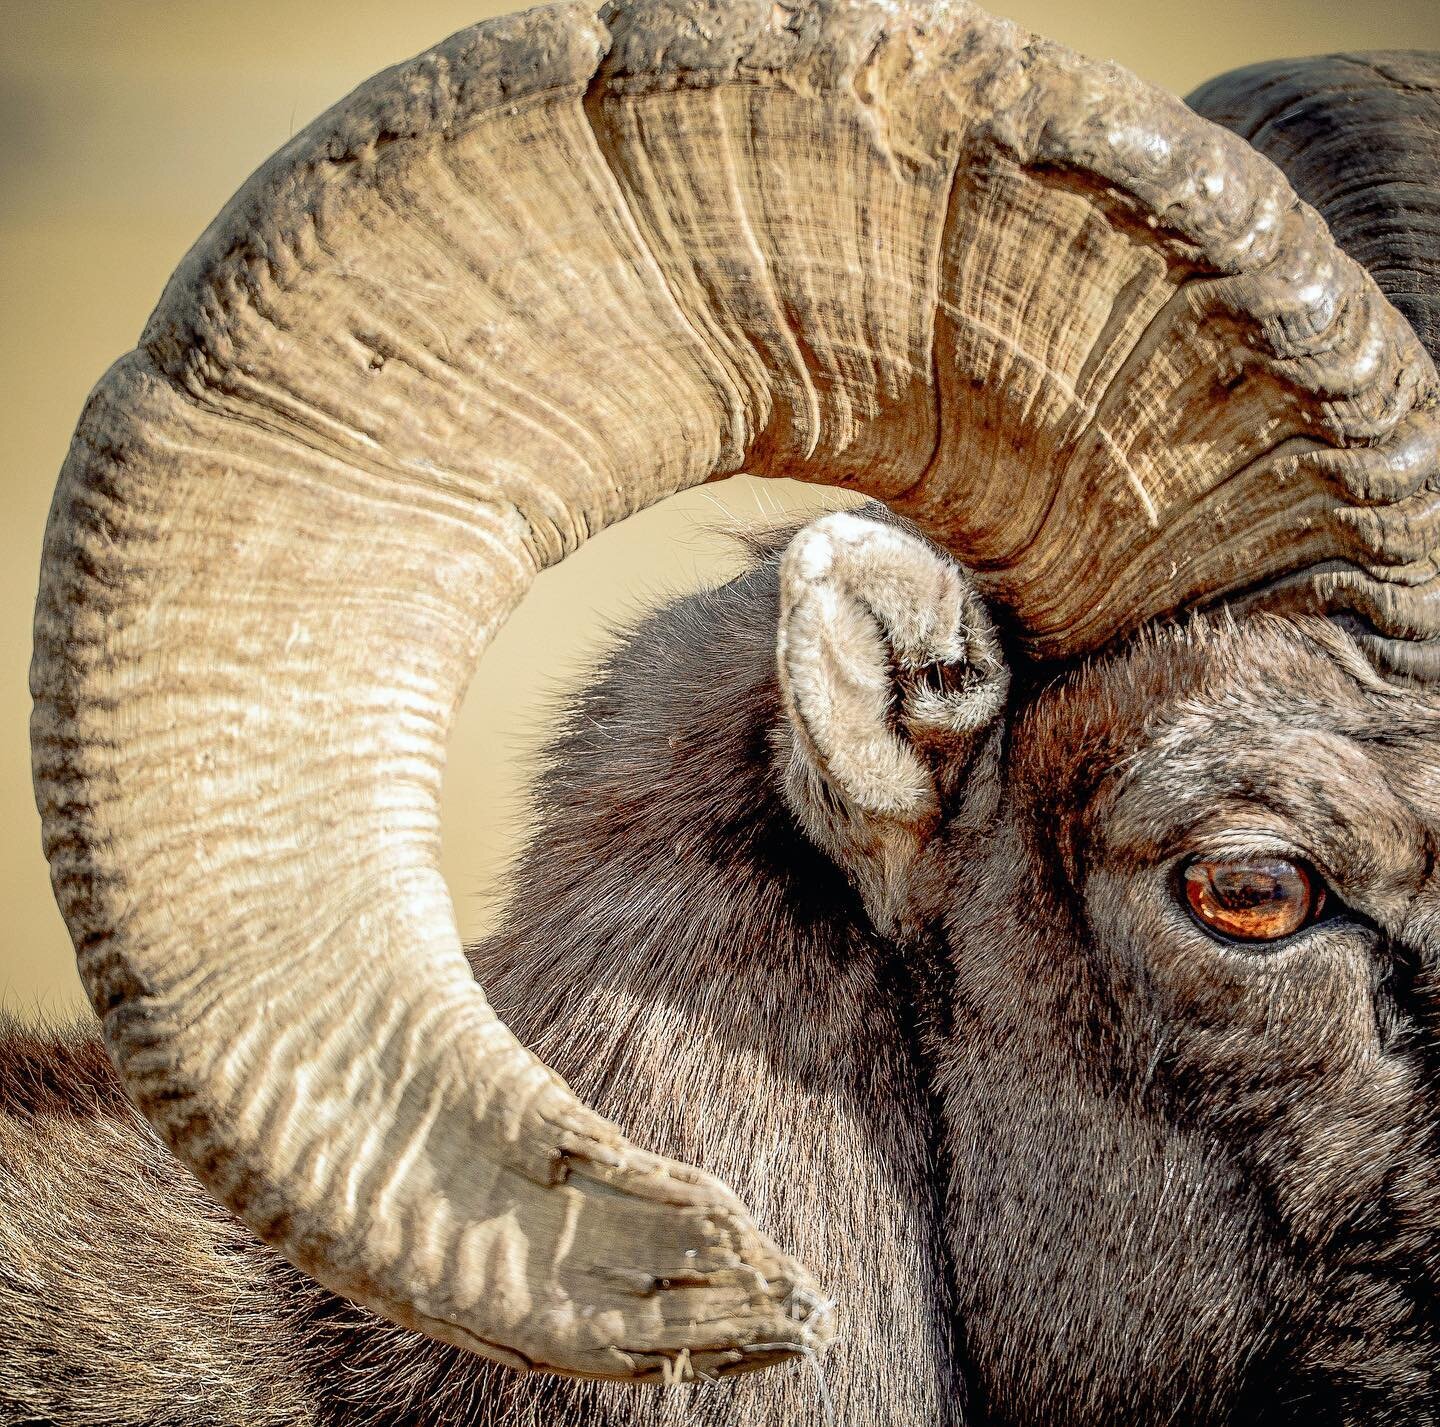 Wildlife Wednesday!
&bull;
For the past five years, Cottonwood has been working to end private domestic sheep grazing on public lands in the Gravelly Mountains in an effort to allow the public, bighorn sheep, grizzly bears, and other wildlife to use 